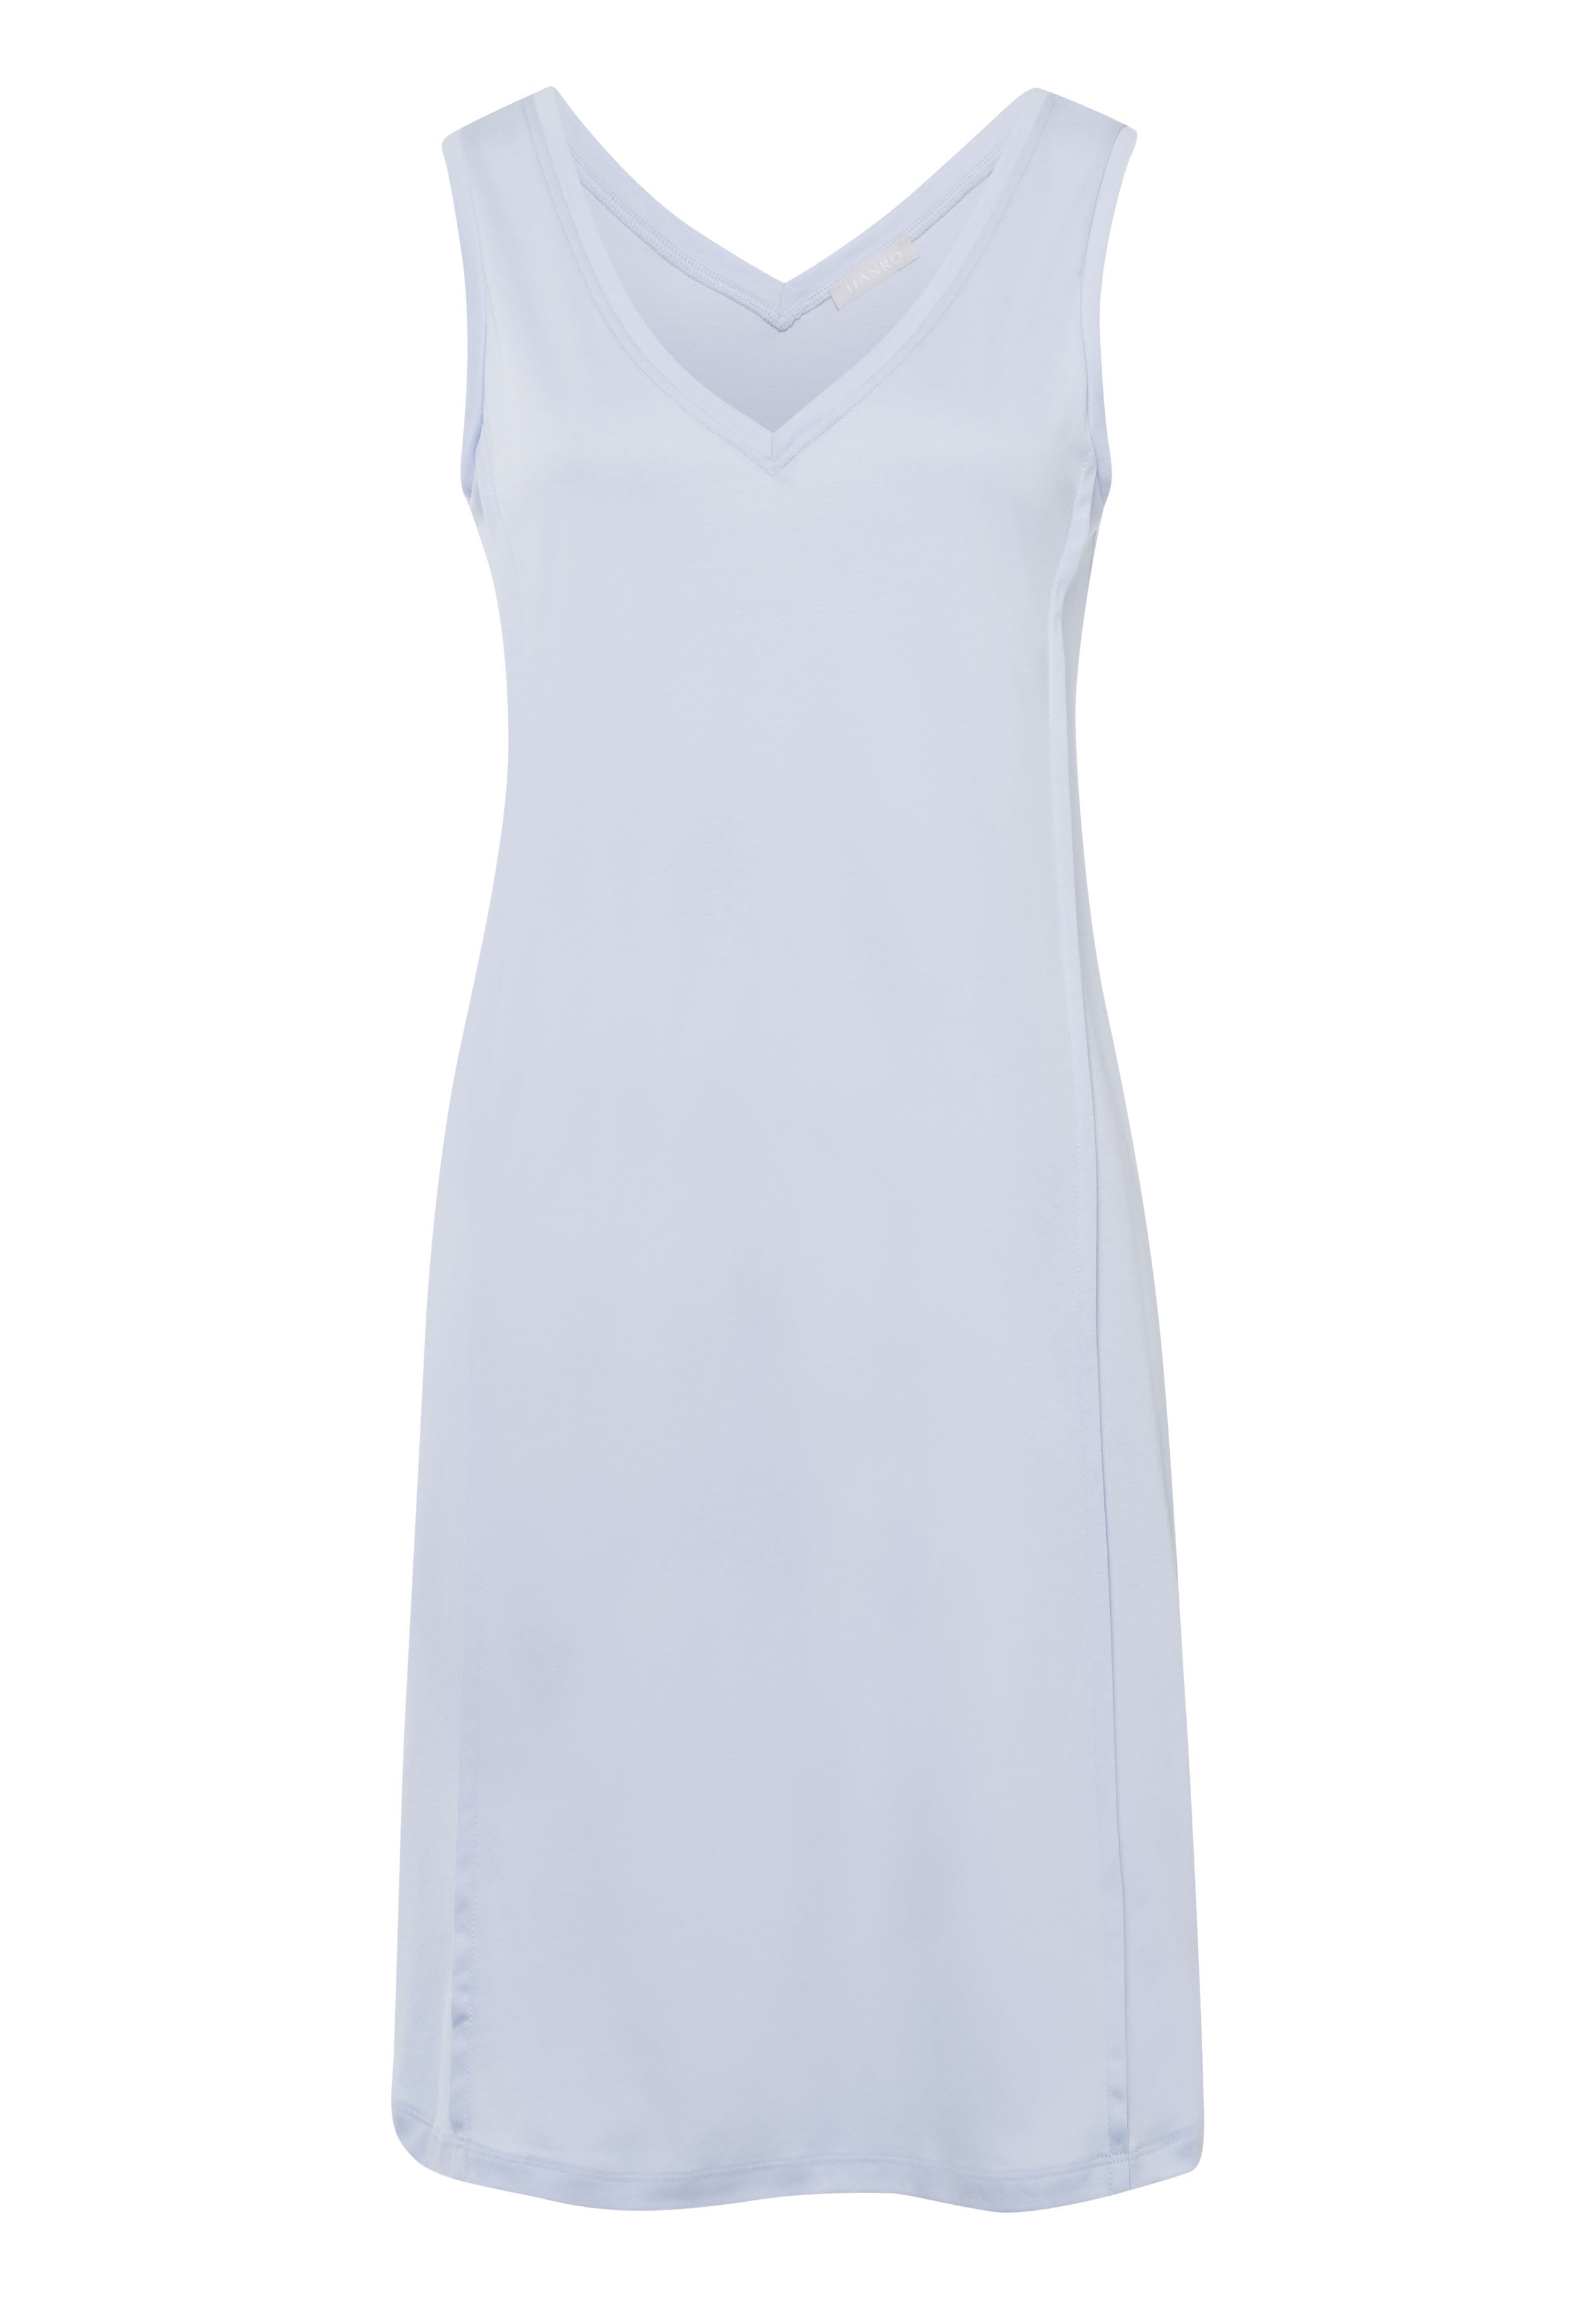 77946 Pure Essence Tank Gown - 511 Blue Glow